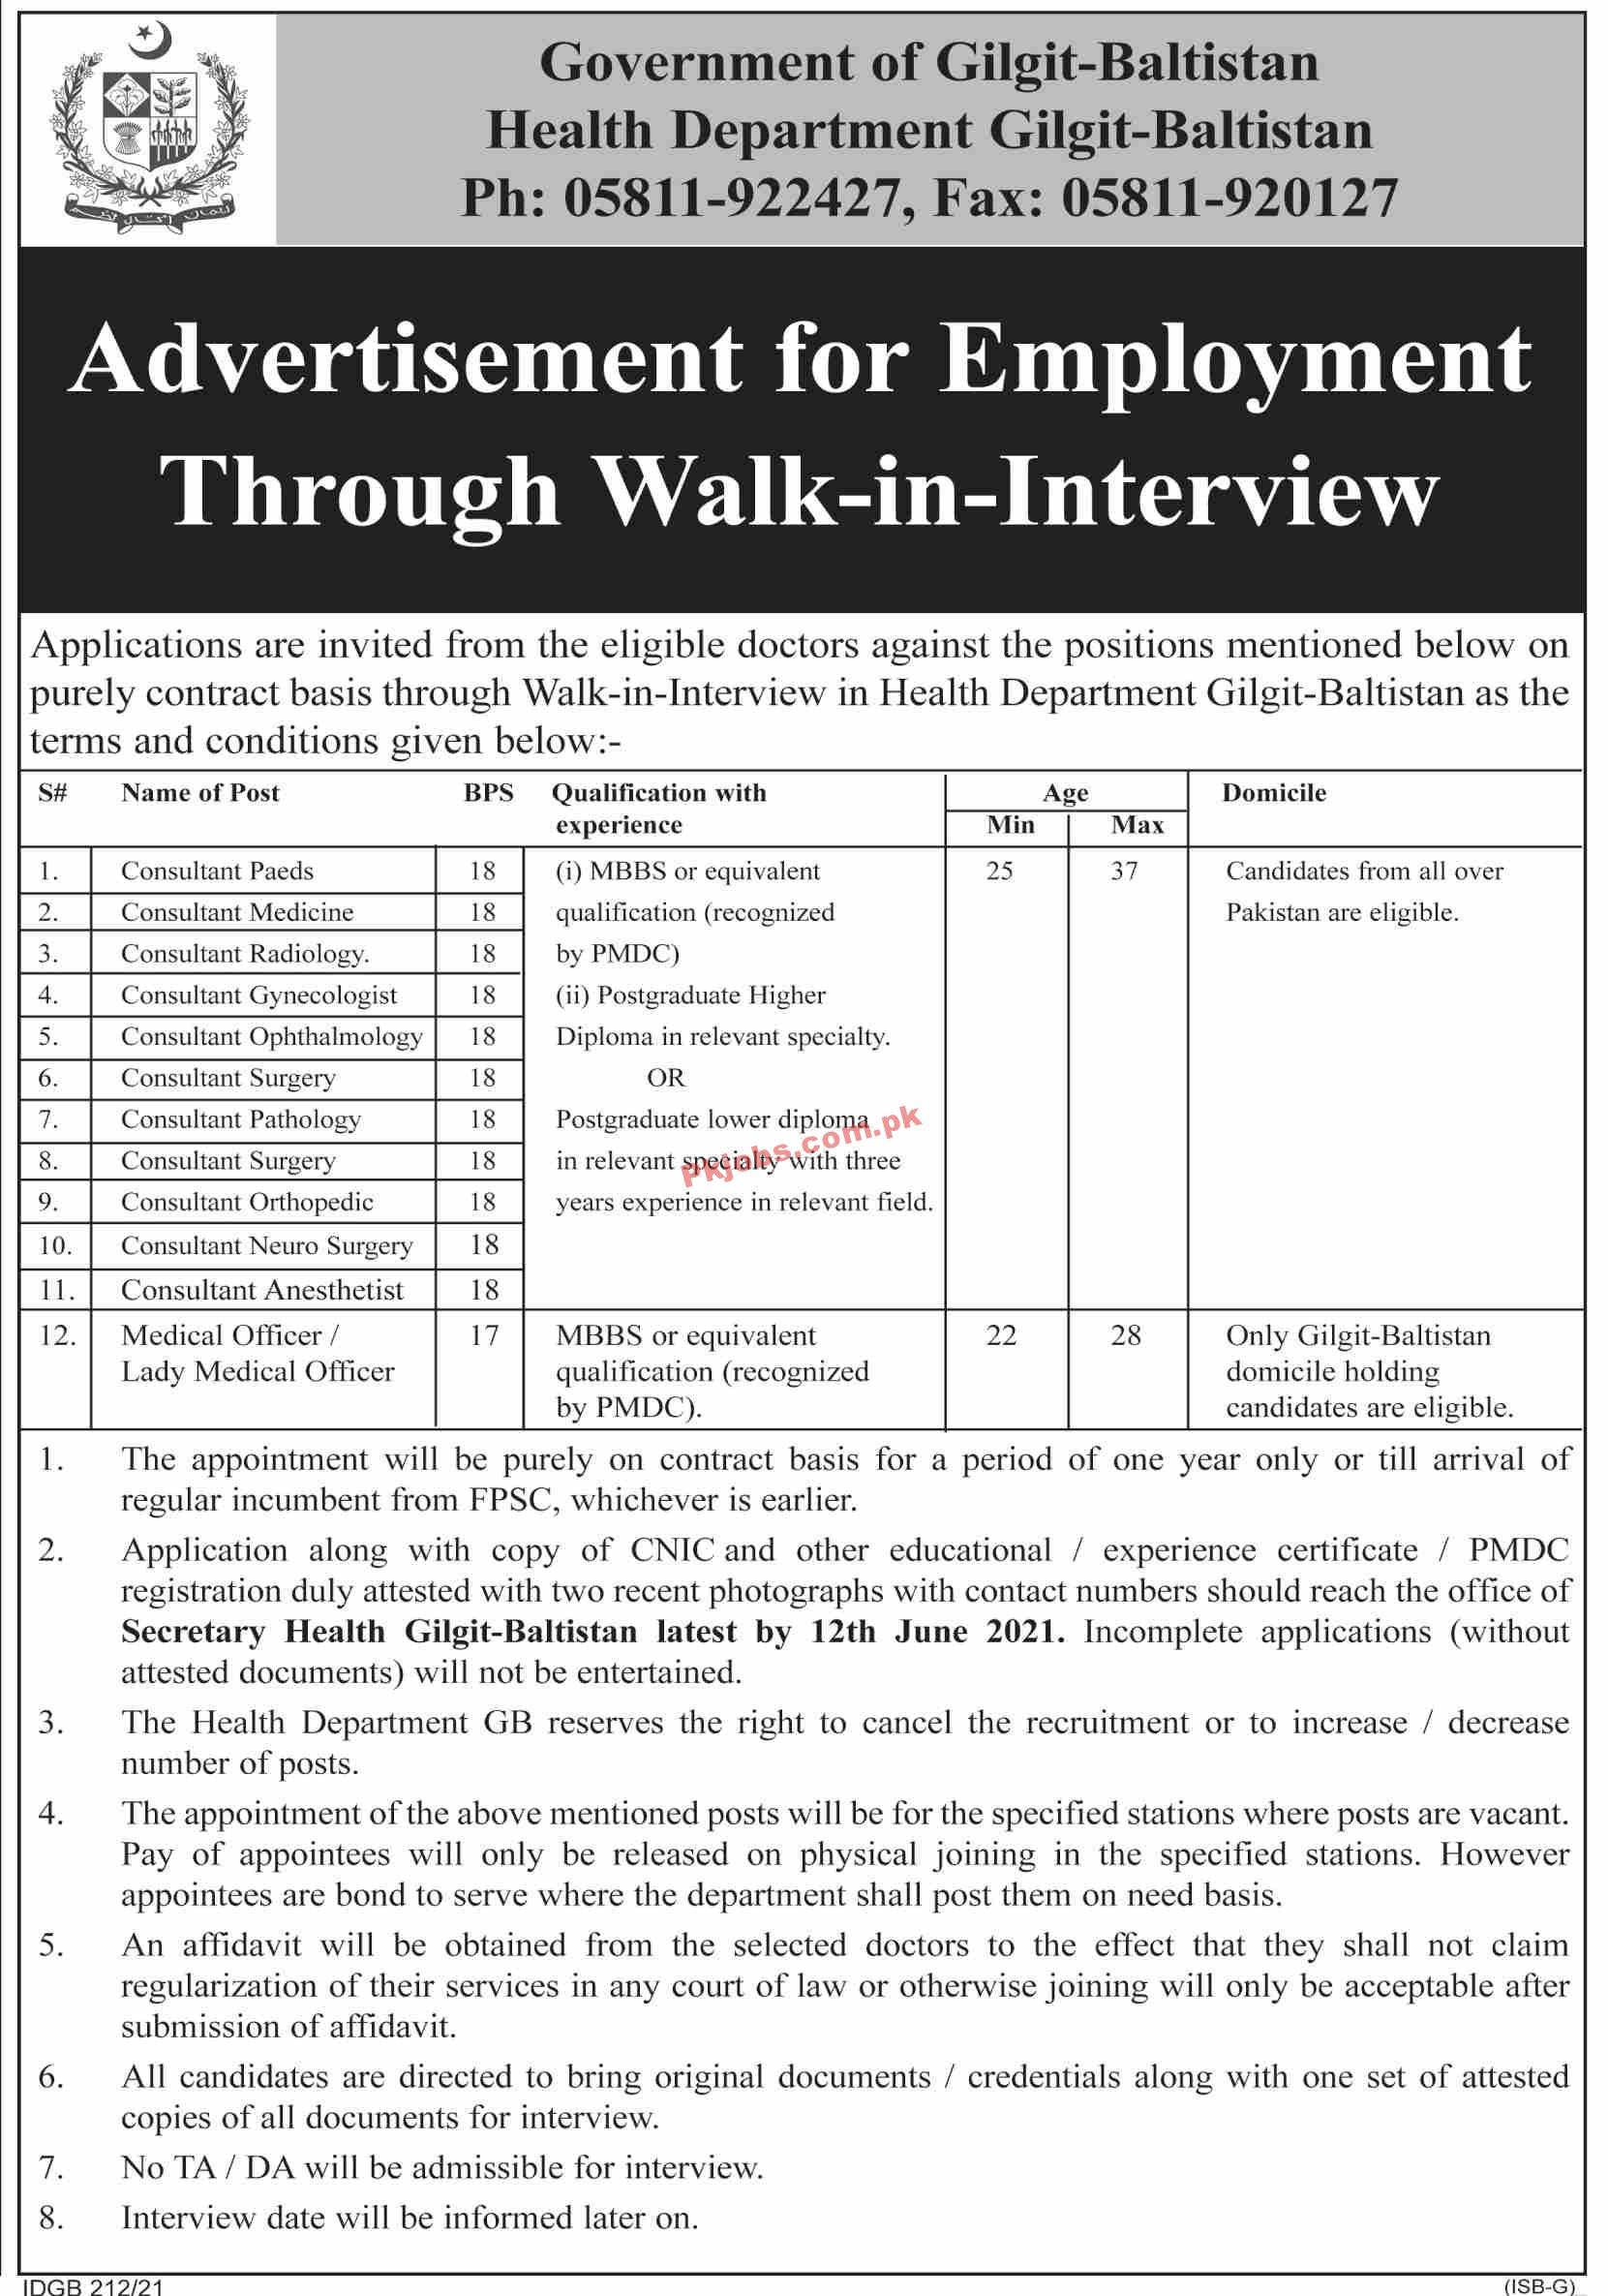 Jobs in Government of Gilgit Baltistan Health Department